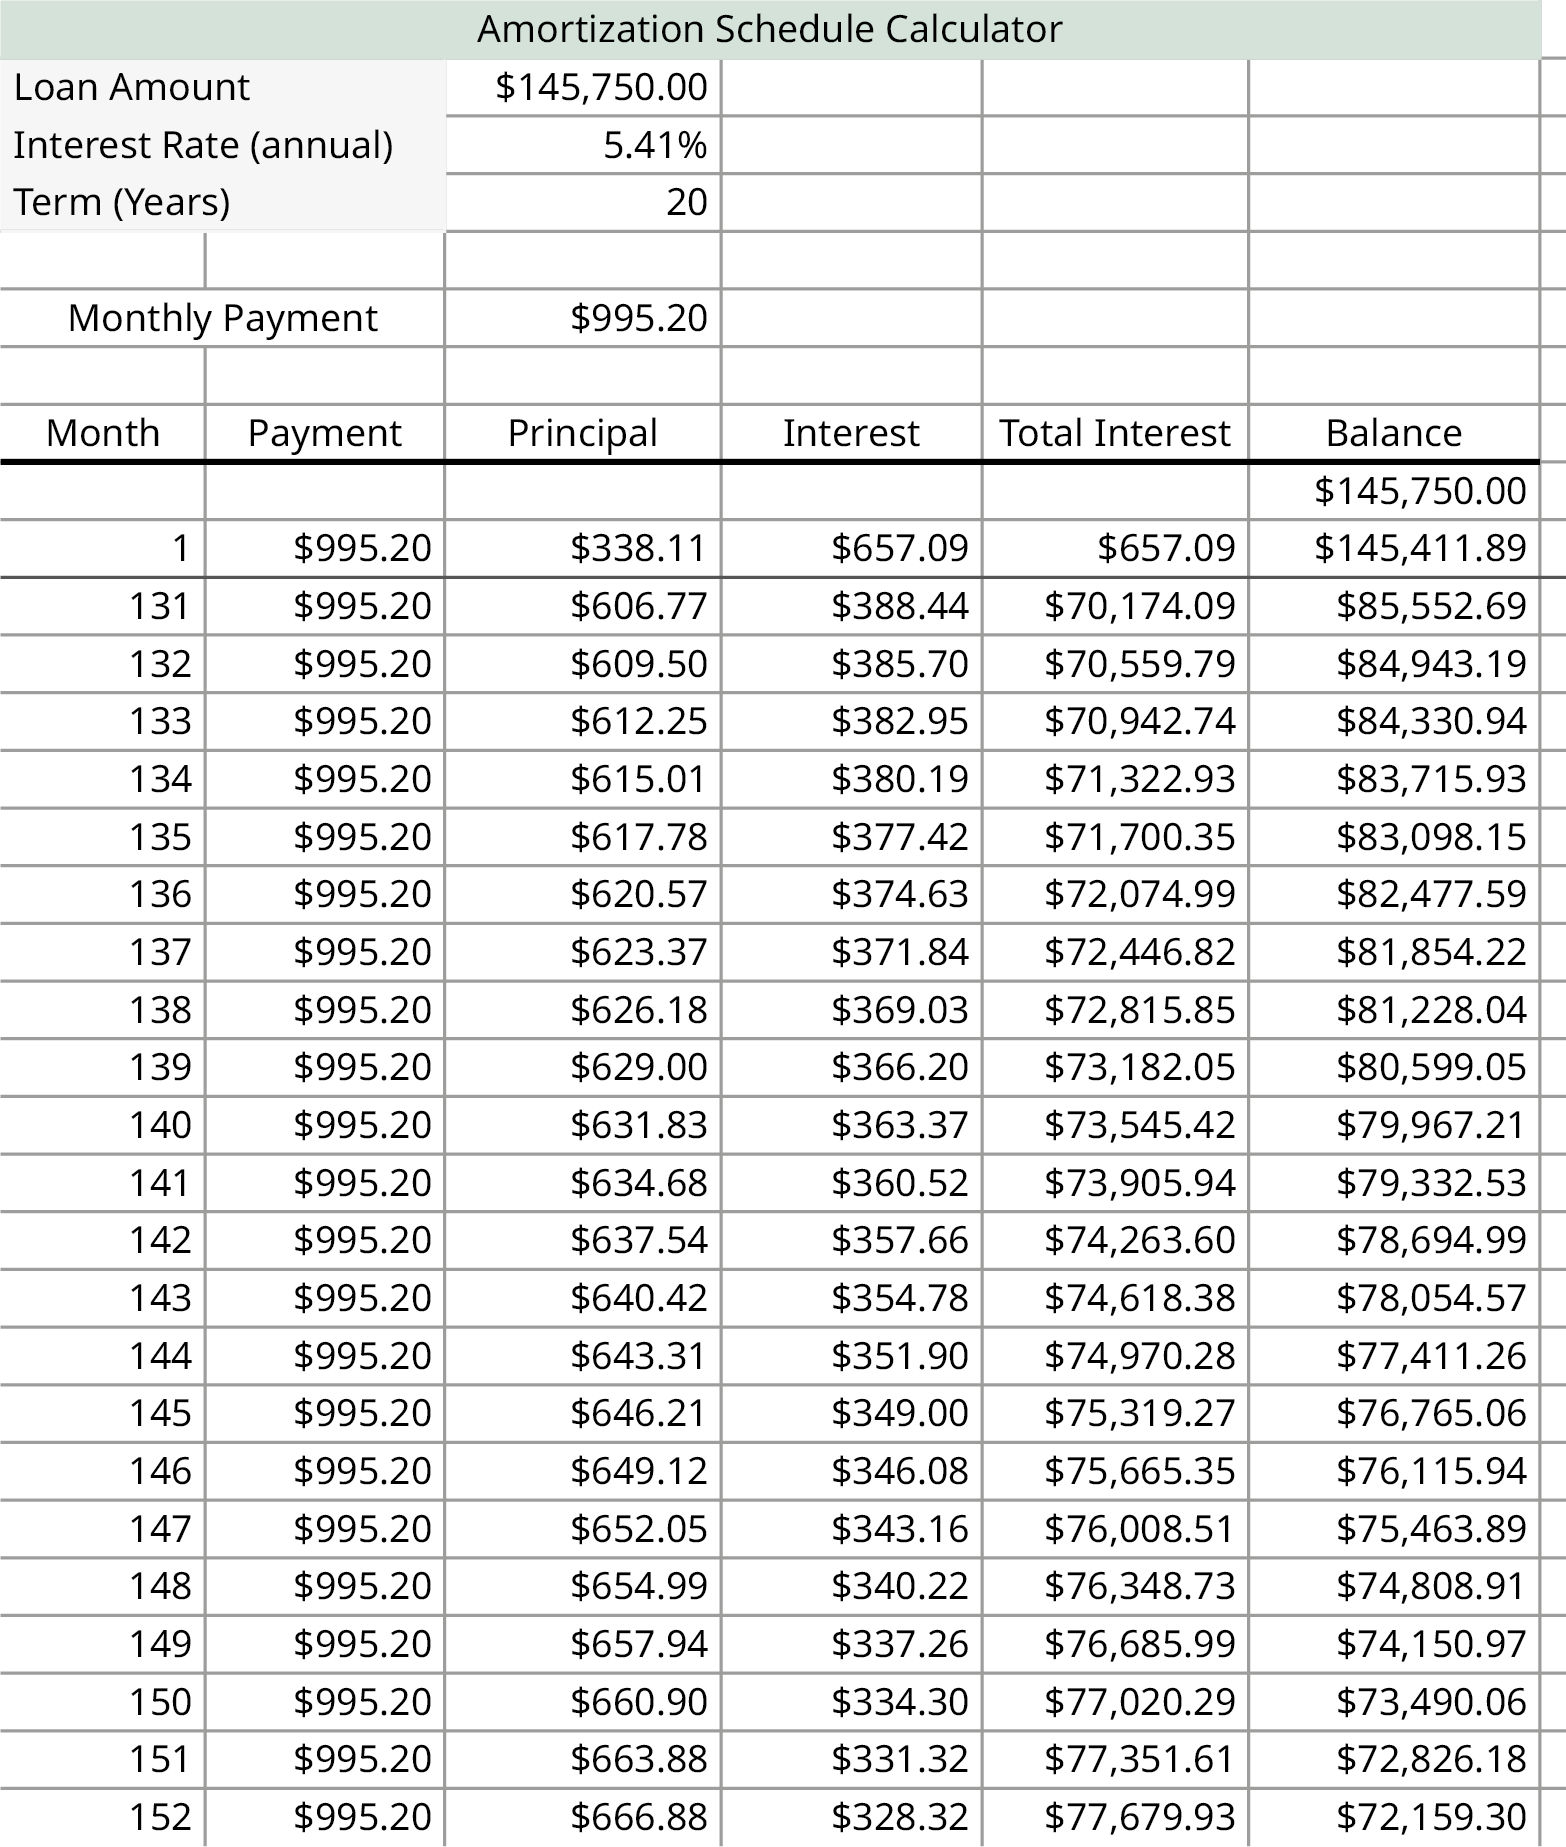 A spreadsheet labeled as amortization schedule calculator. The sheet calculates the repayment for the loan amount of $145,750.00 for an interest rate of 5.41 percent annually and the monthly payment is $995.20. The factors include calculations such as month, payment, principal, interest, total, and interest and balance.